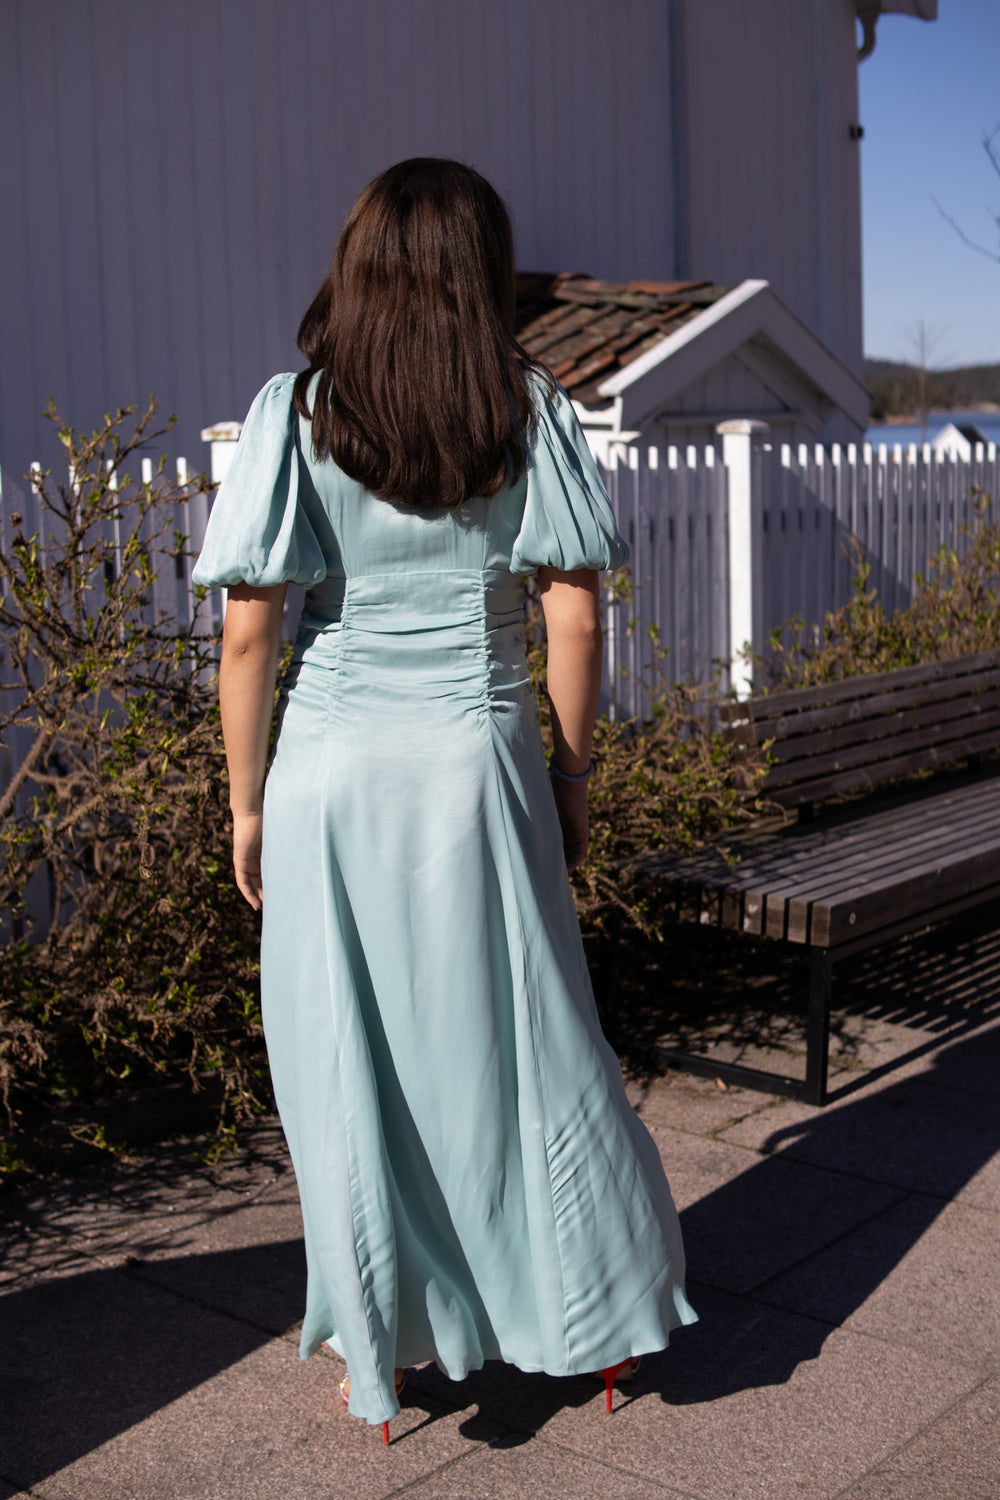 Crepe Satin Rouching Gown - Turquoise - Kjoler - Helt Dilla AS